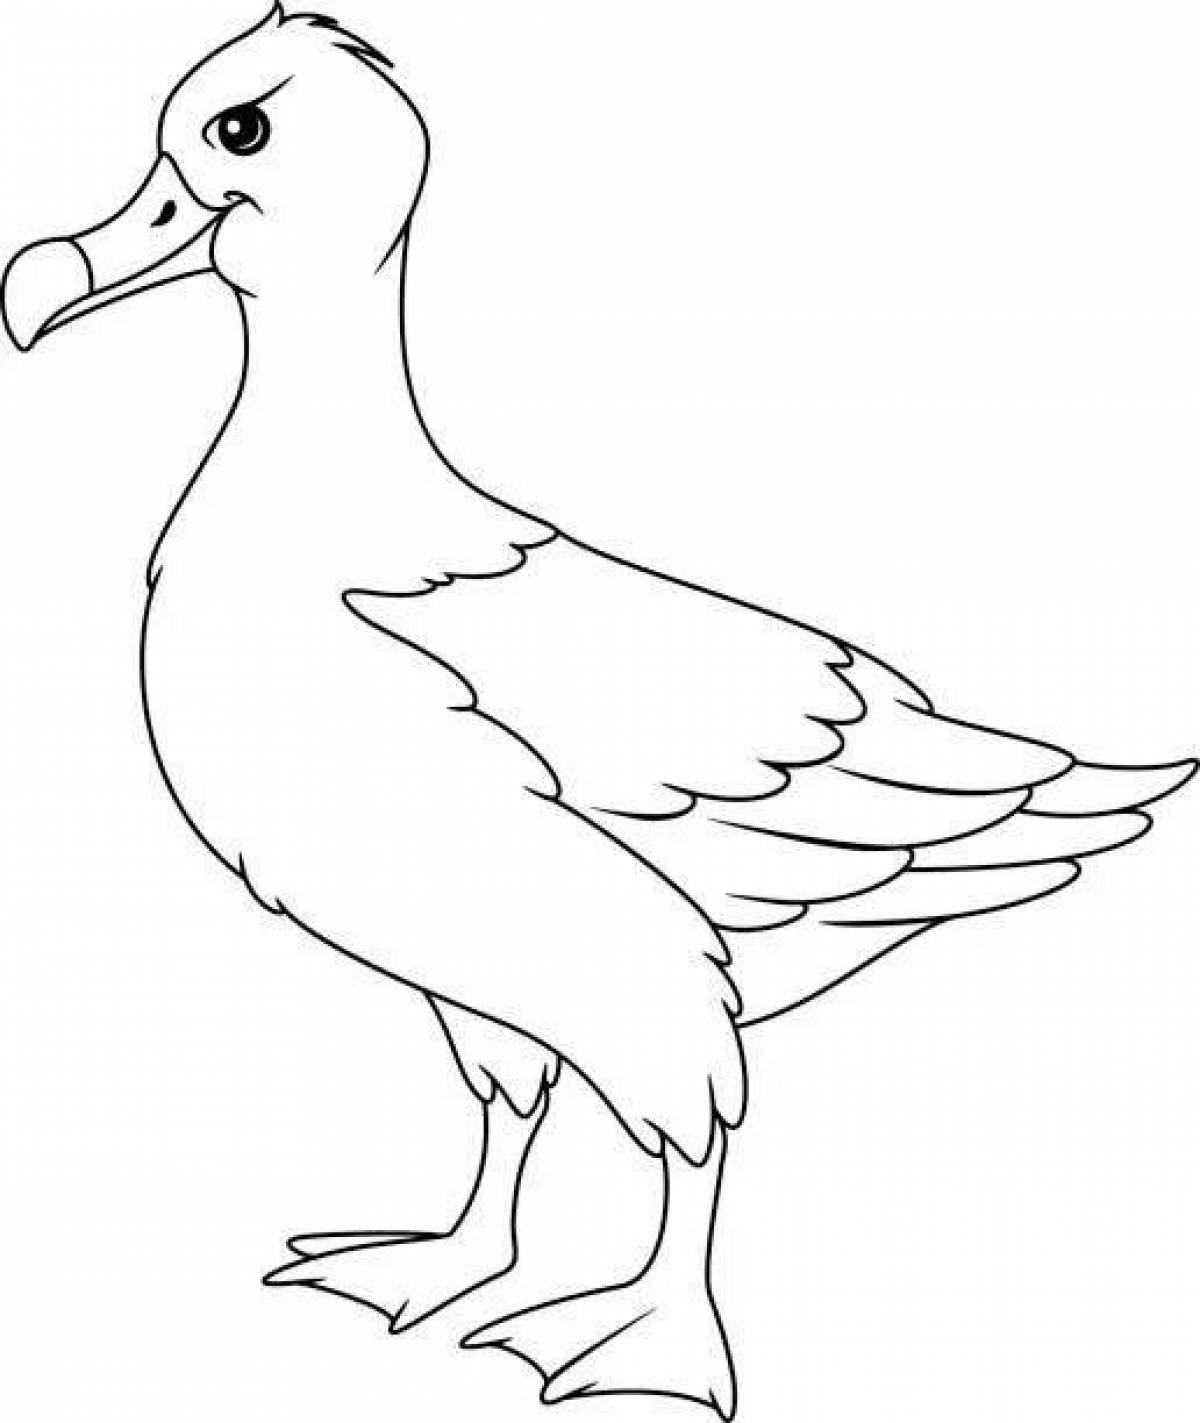 Awesome albatross coloring book